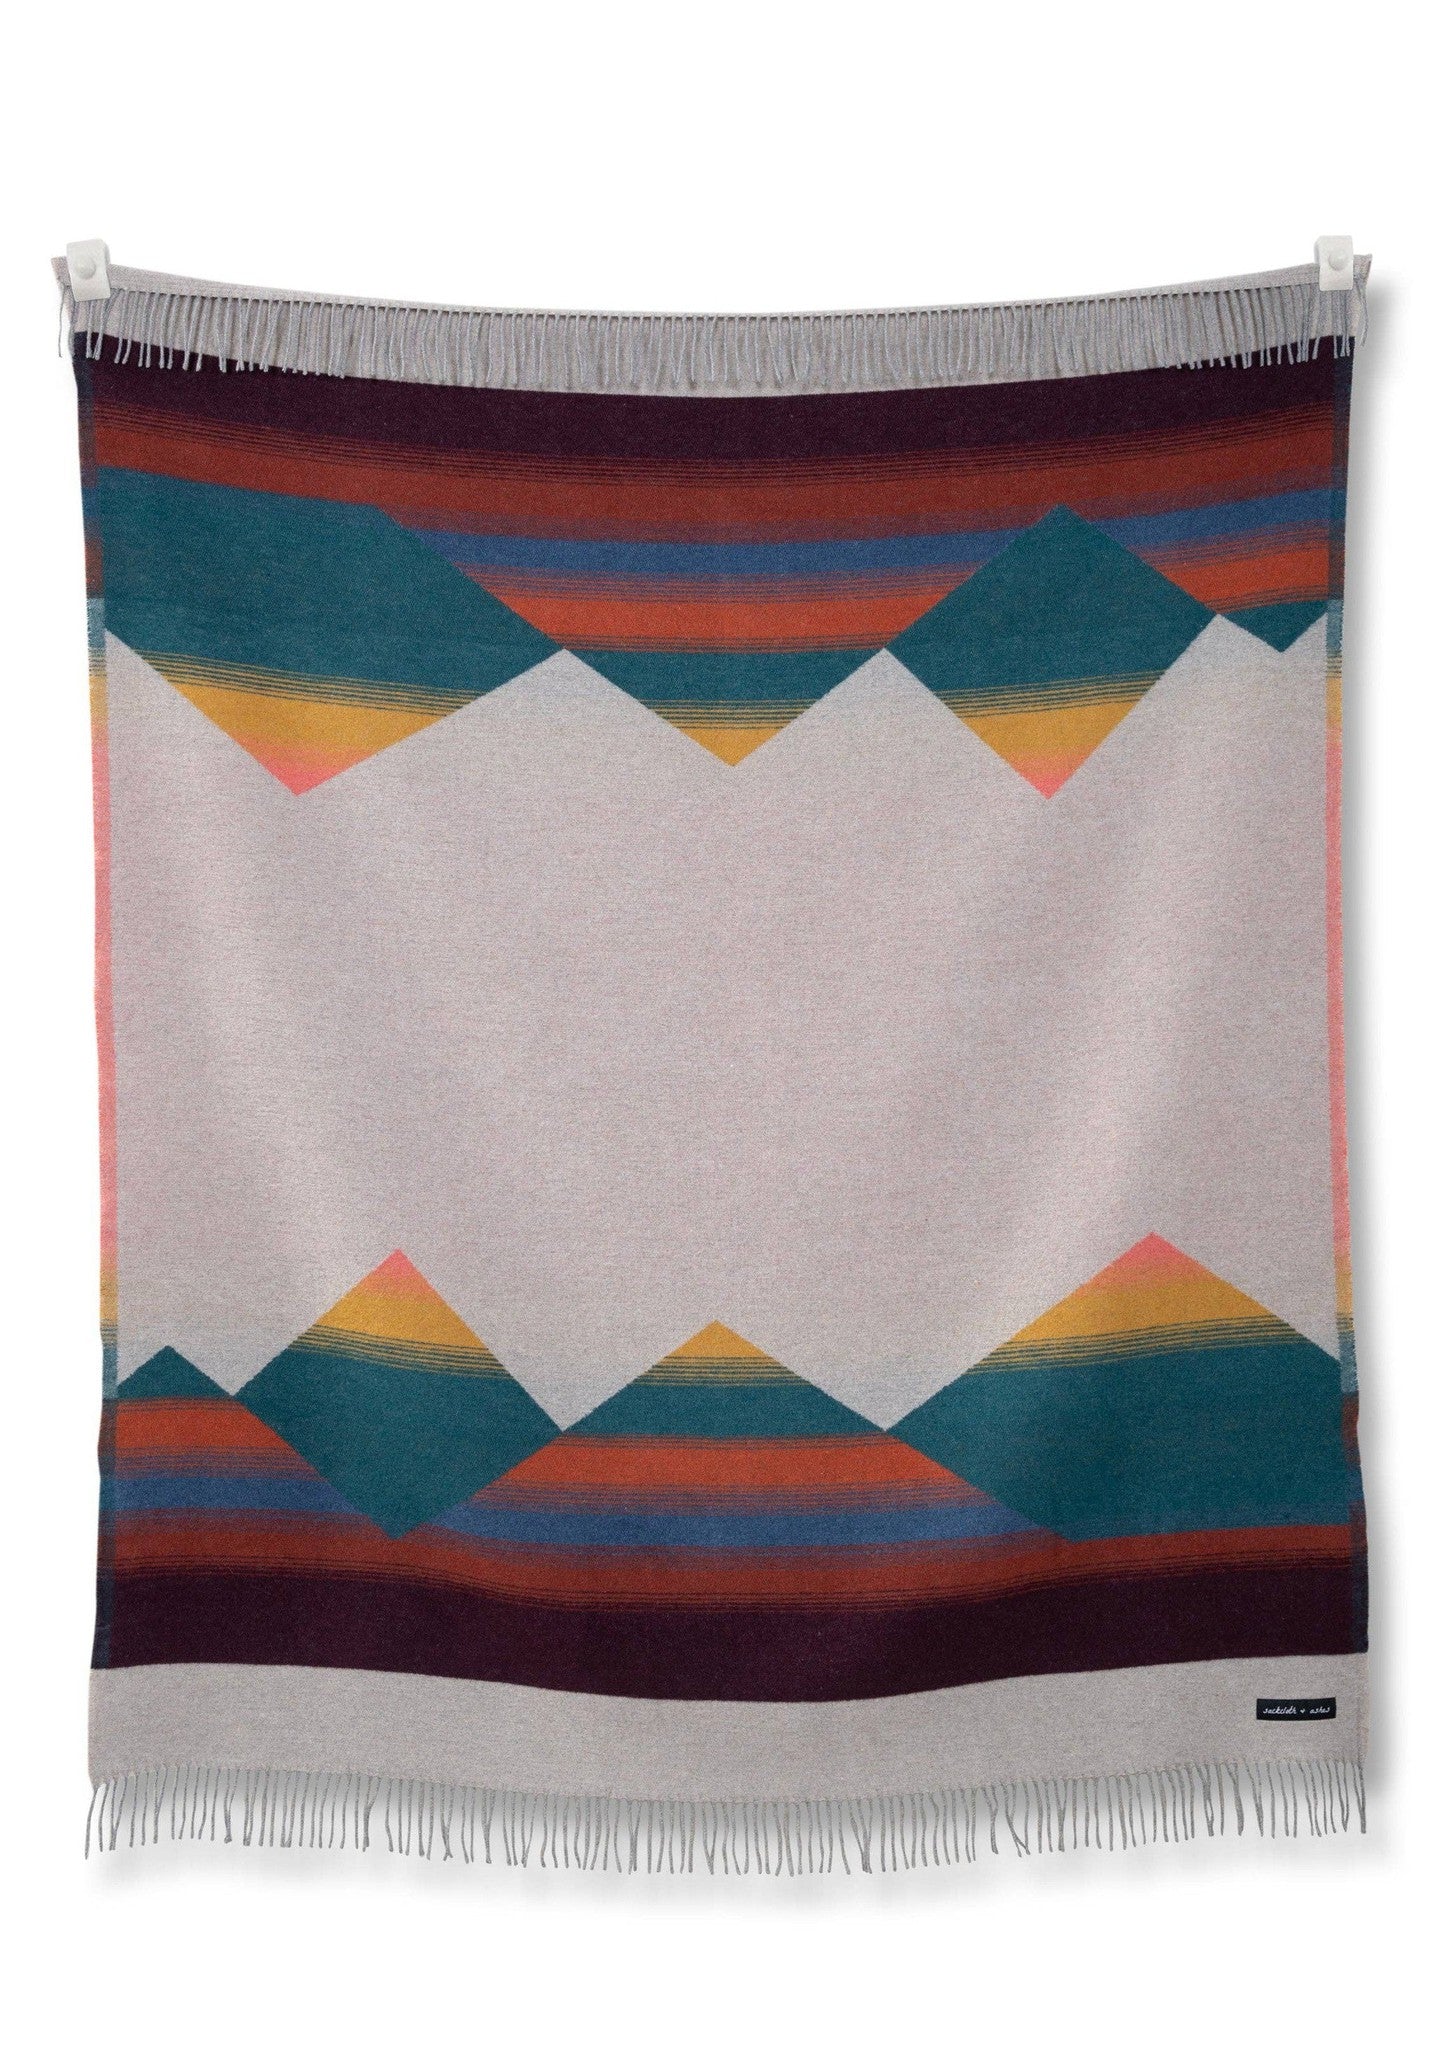 A colorful Mountain Tropic blanket hanging on a wall by Sackcloth & Ashes.